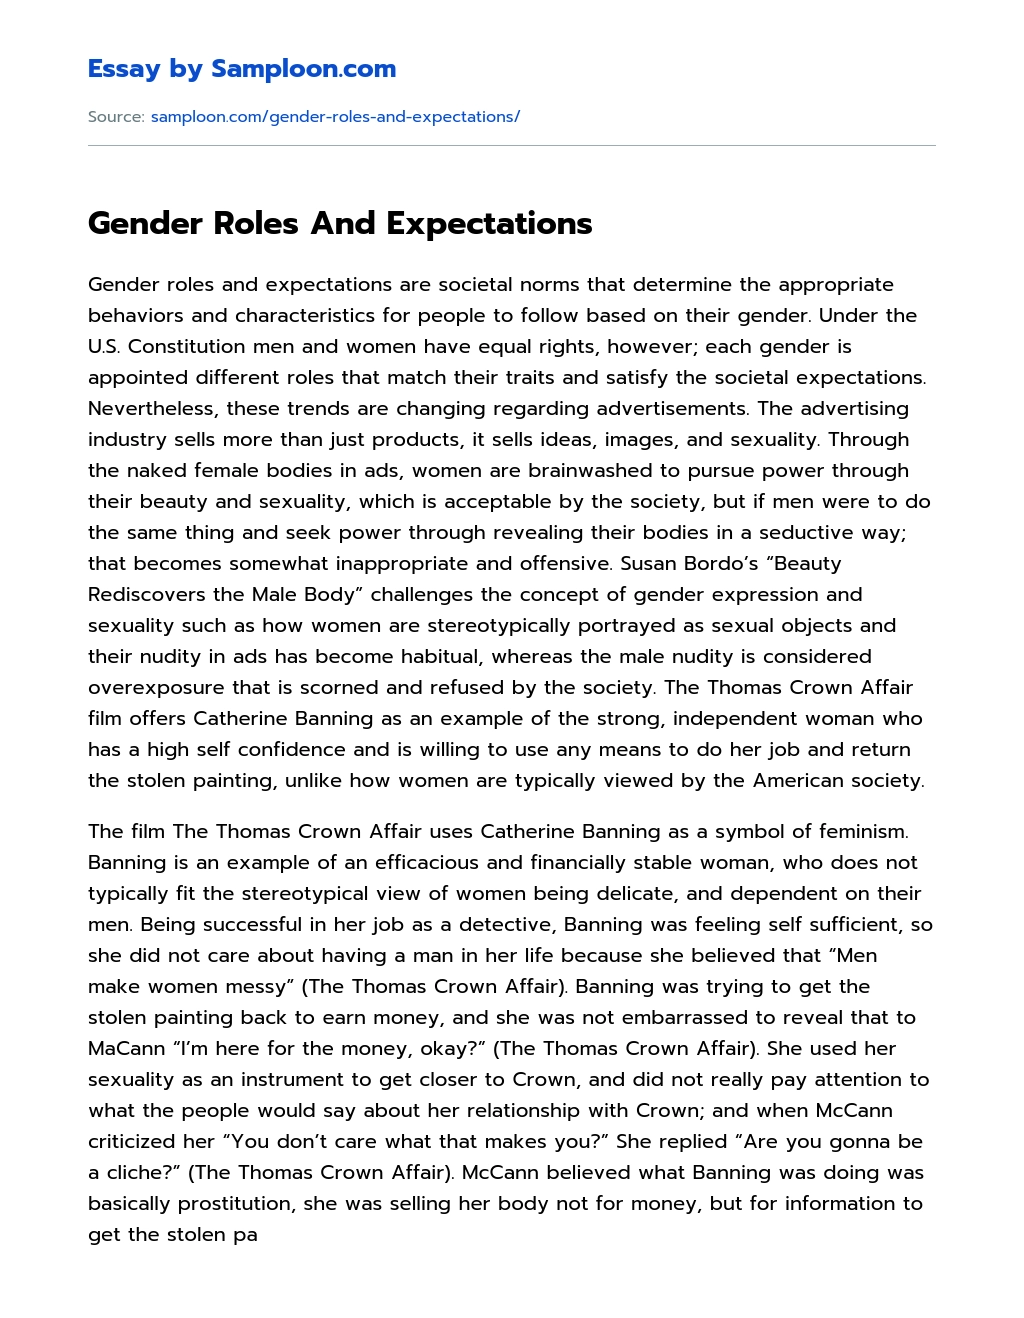 Gender Roles And Expectations Summary essay